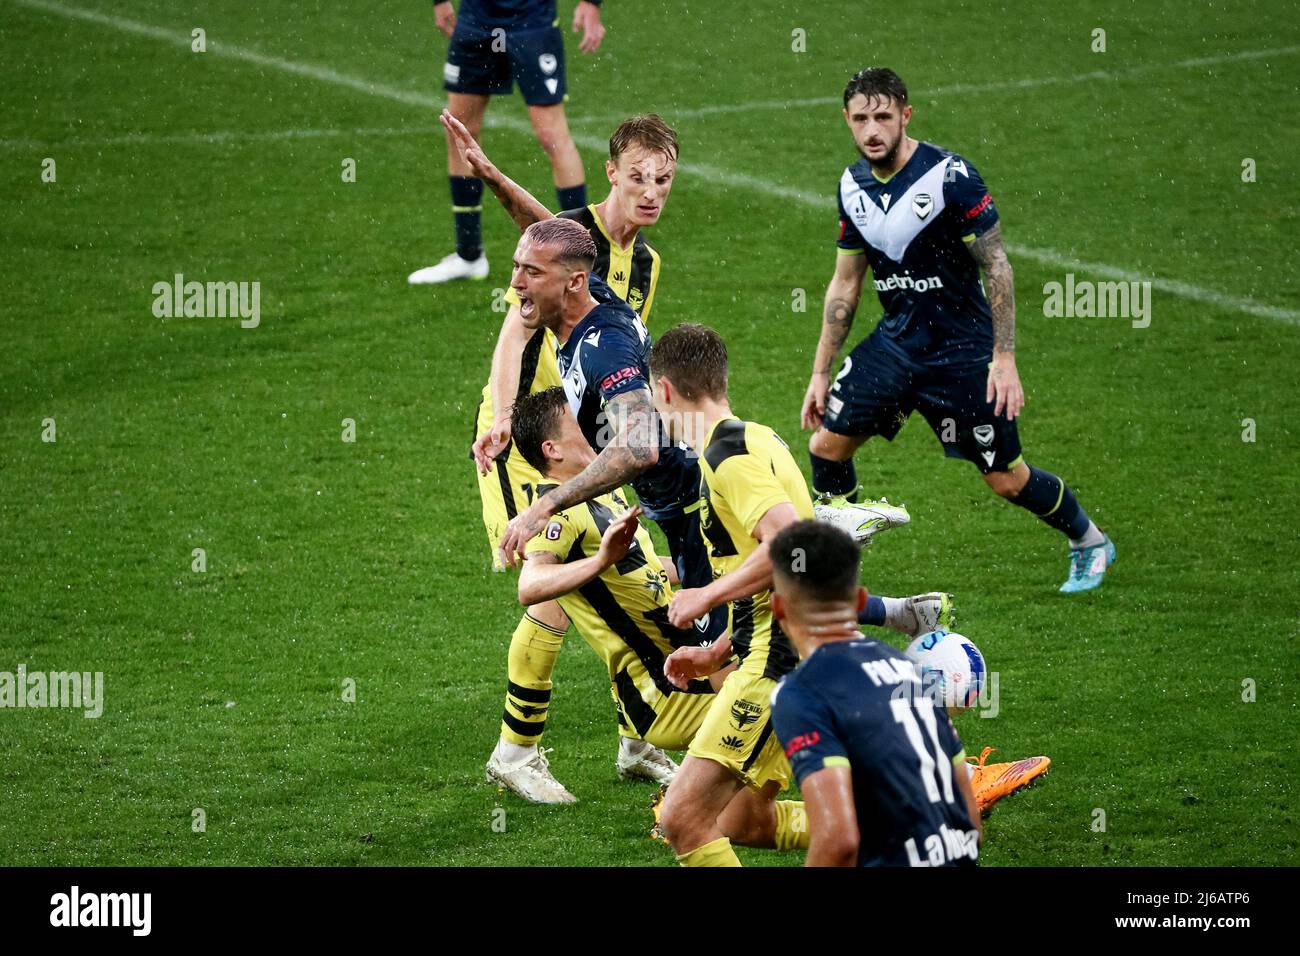 Melbourne, Australia, 29 April, 2022. Jason Davidson of Melbourne Victory falls during the A-League soccer match between Melbourne Victory and Wellington Phoenix at AAMI Park on April 29, 2022 in Melbourne, Australia. Credit: Dave Hewison/Speed Media/Alamy Live News Stock Photo